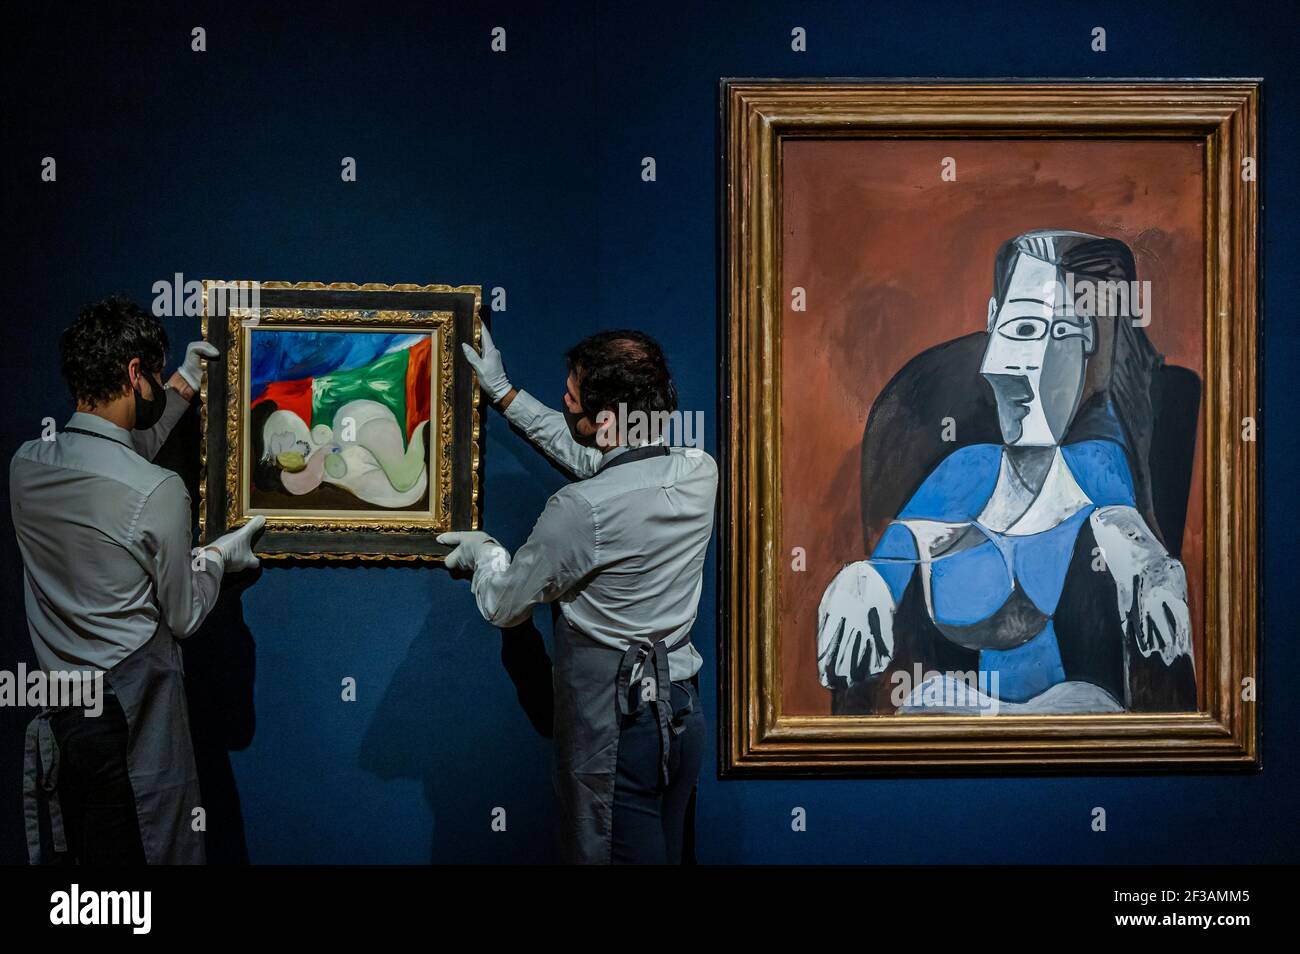 London, UK. 16th Mar, 2021. Pablo Picasso, Femme nue couchée au collier (Marie-Thérèse), Painted in Boisgeloup on 18 June 1932, Estimate : £9,000,000-15,000,000 with his Femme assise dans un fauteuil noir (Jacqueline), Painted in Mougins on 19 November & 18 December 1962, Estimate : £6,000,000-9,000,000 - Behind closed doors: preparations take place at christie's ahead of the livestreamed 20th century art evening sale and the art of the surreal sale on 23 march Credit: Guy Bell/Alamy Live News Stock Photo